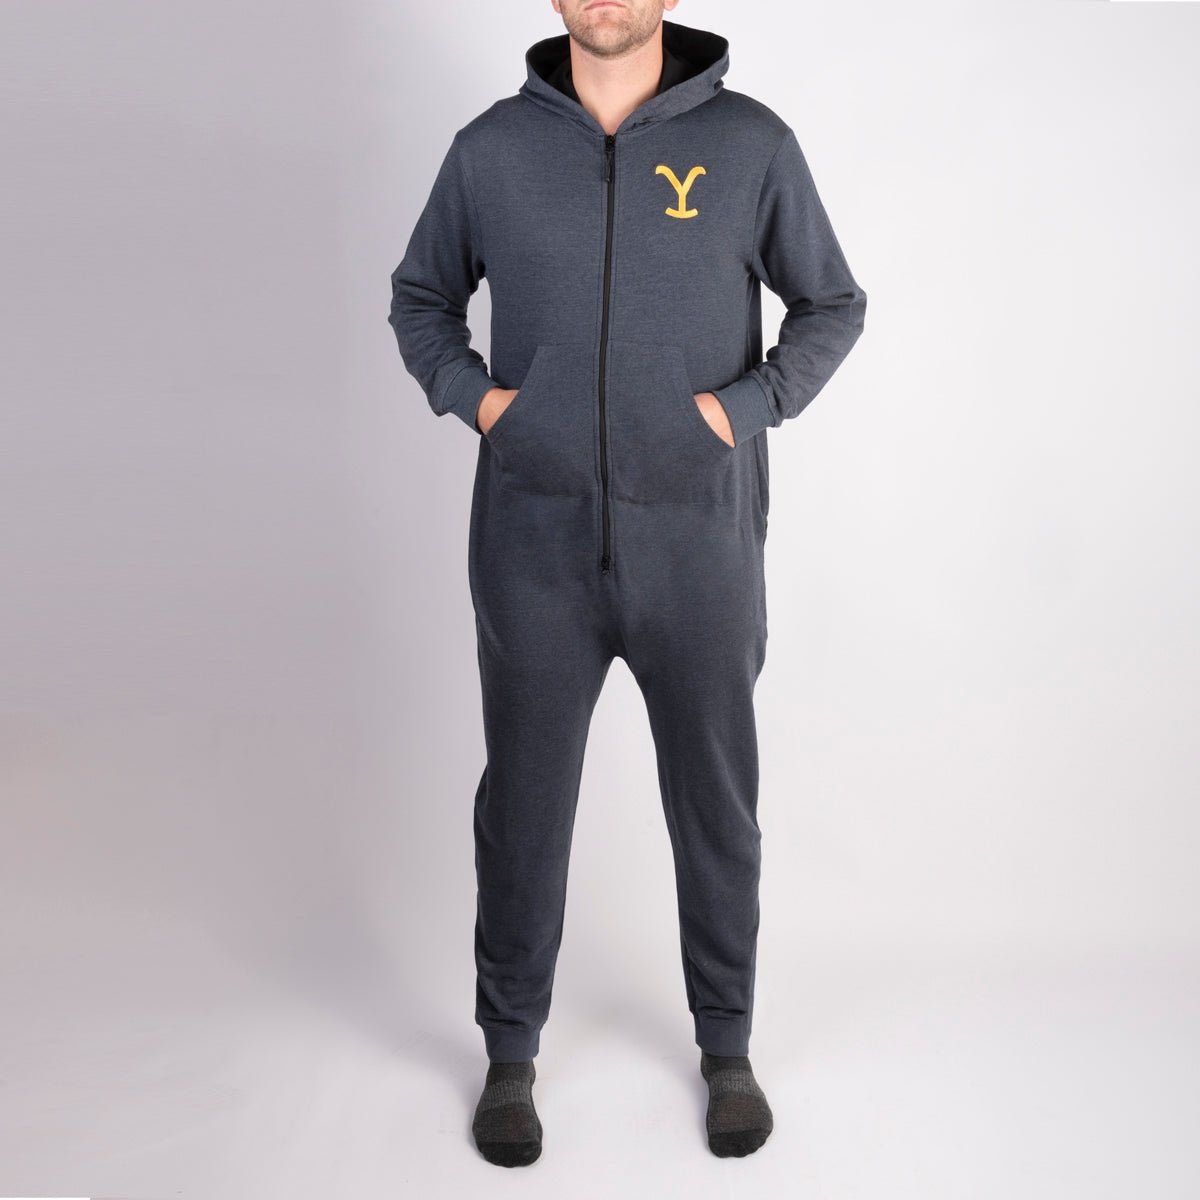 Yellowstone Y Logo Basecamp Embroidered Onesie - Paramount Shop